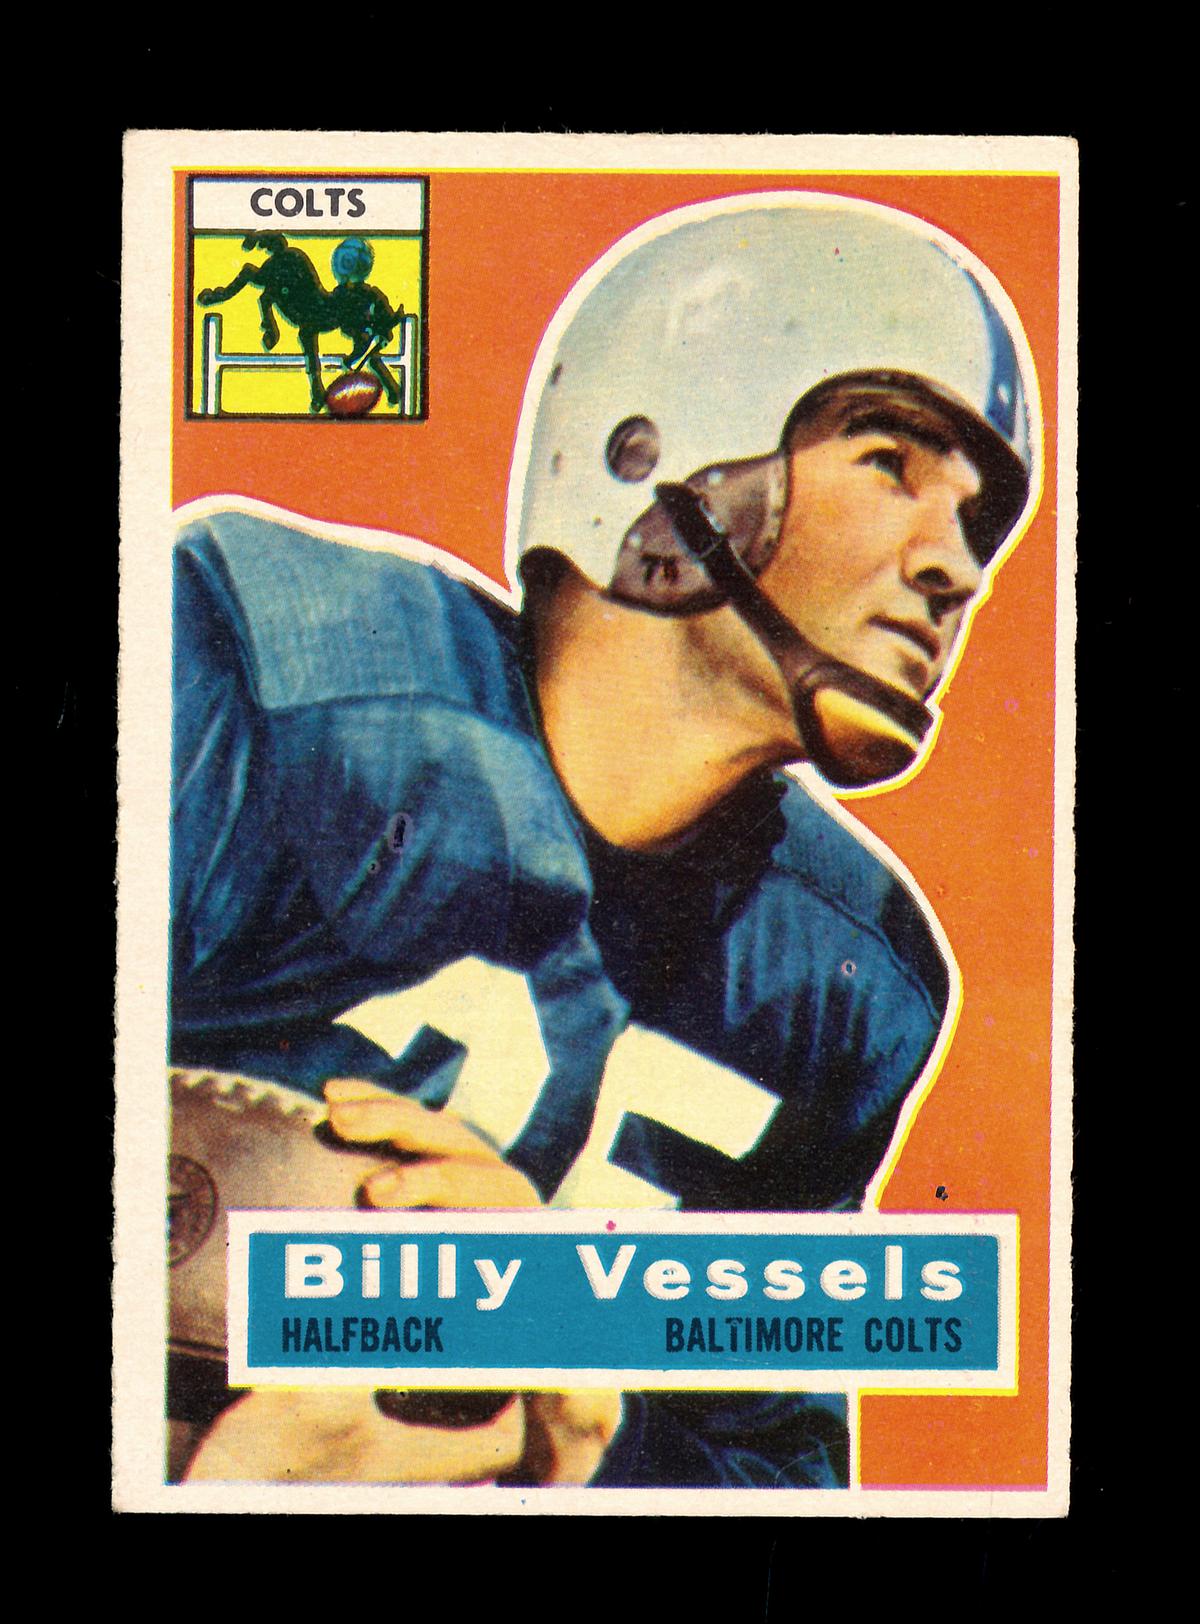 1956 Topps ROOKIE Football Card #120 Rookie Billy Vessels Baltimore Colts.